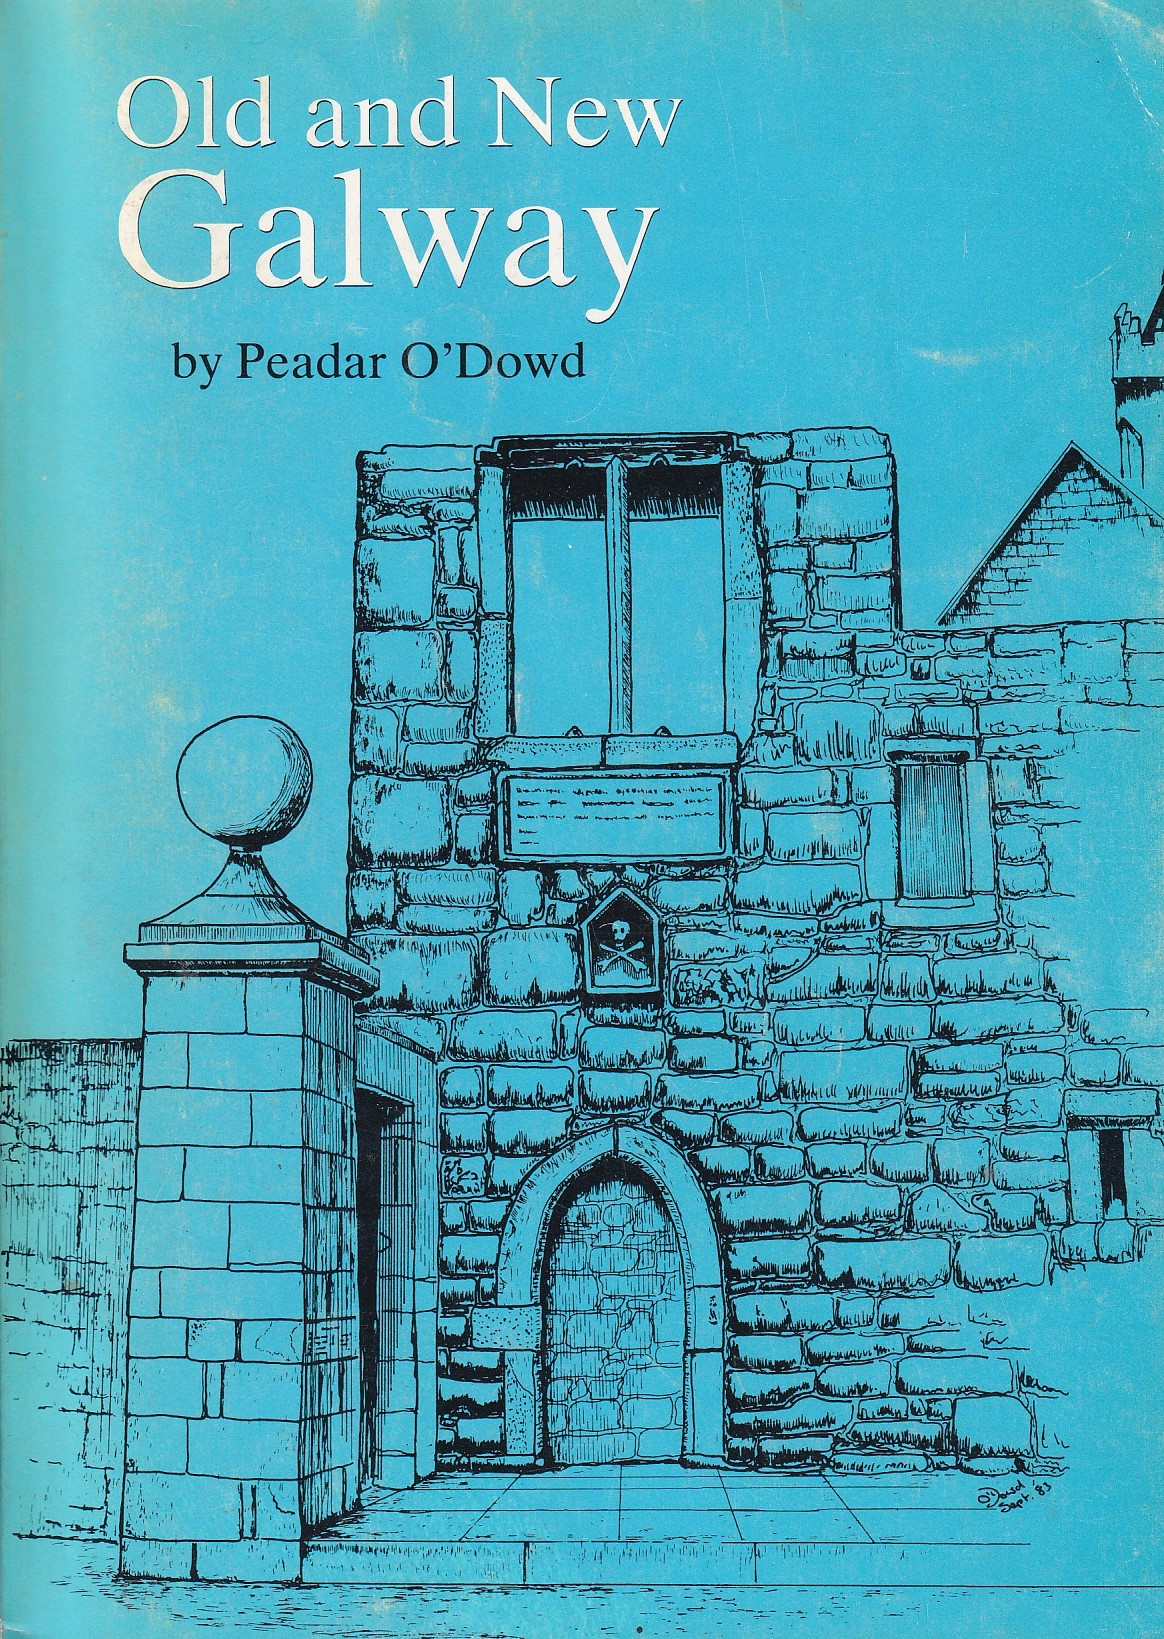 Old and New Galway [Signed] | Peadar O'Dowd | Charlie Byrne's